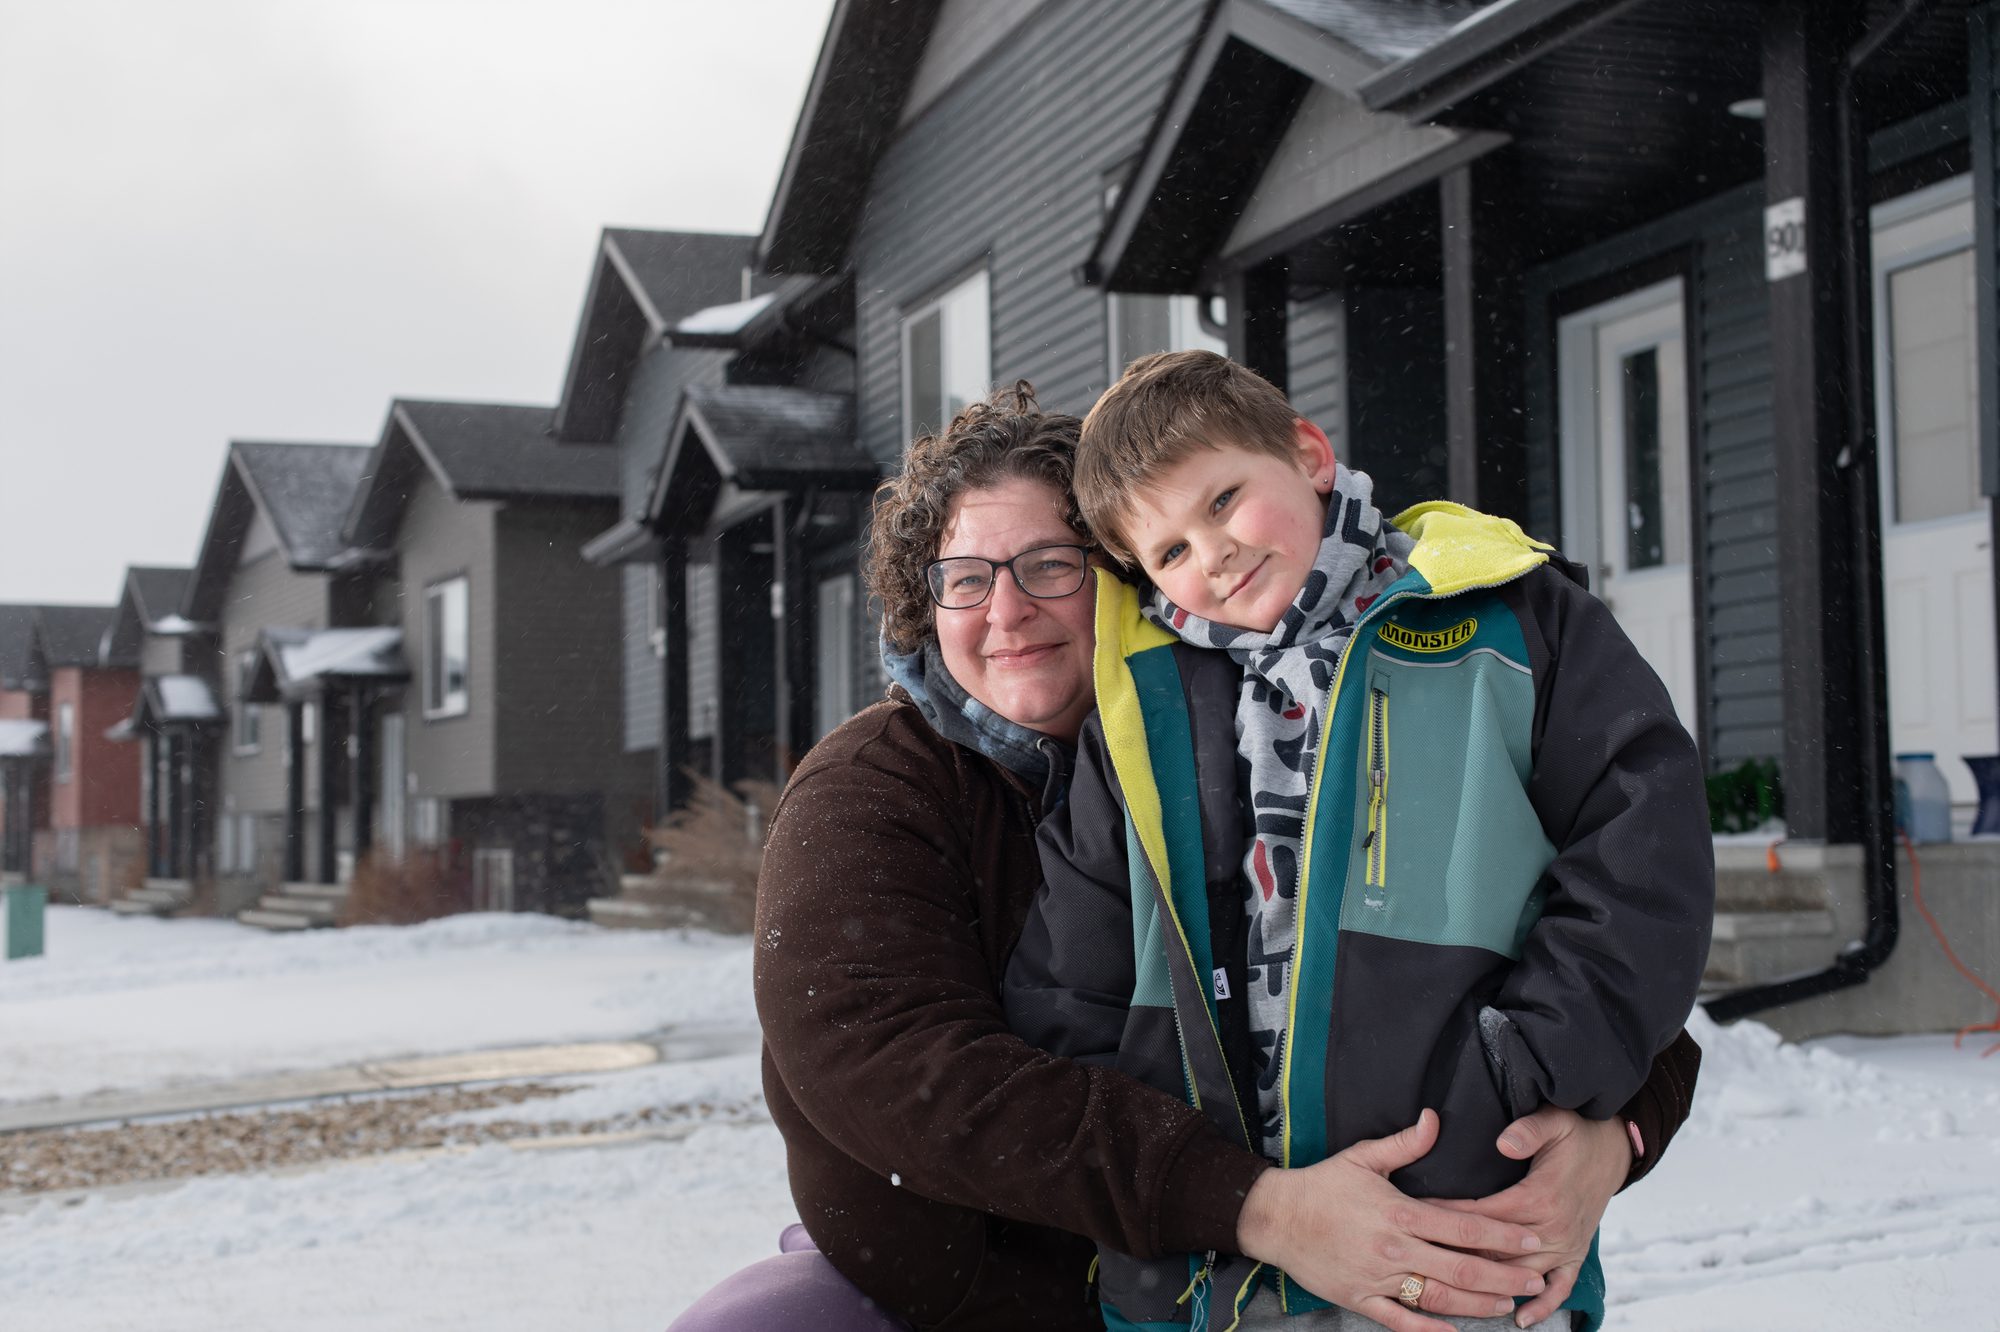 The Move: In Ontario, she worked three jobs. In Alberta, she’s mortgage-free